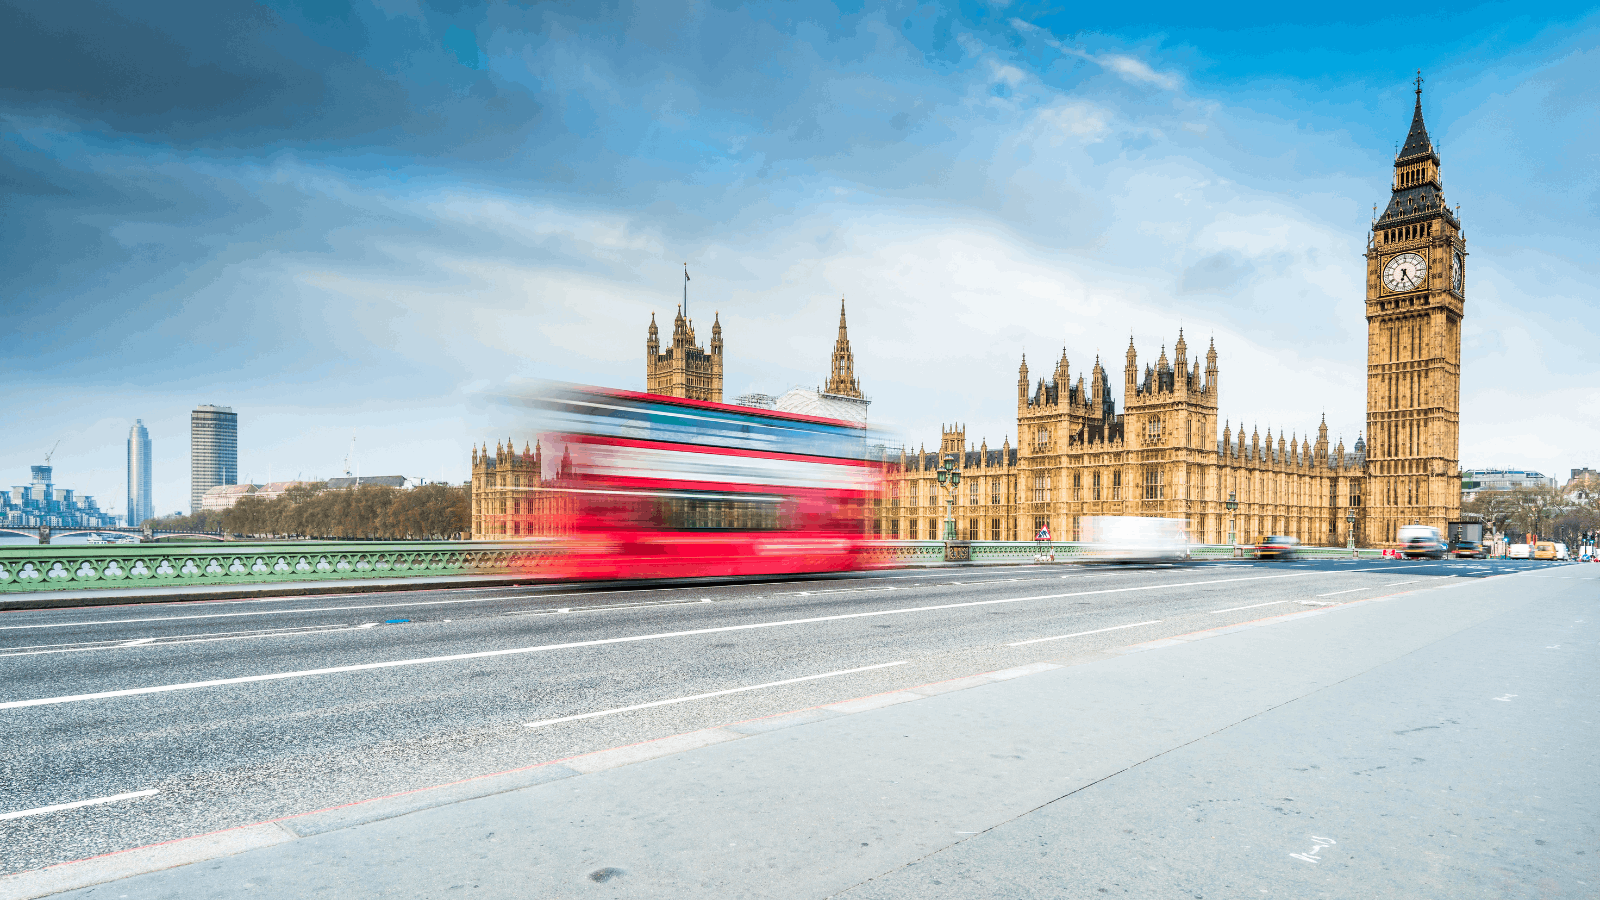 Bus in motion by Big Ben, London